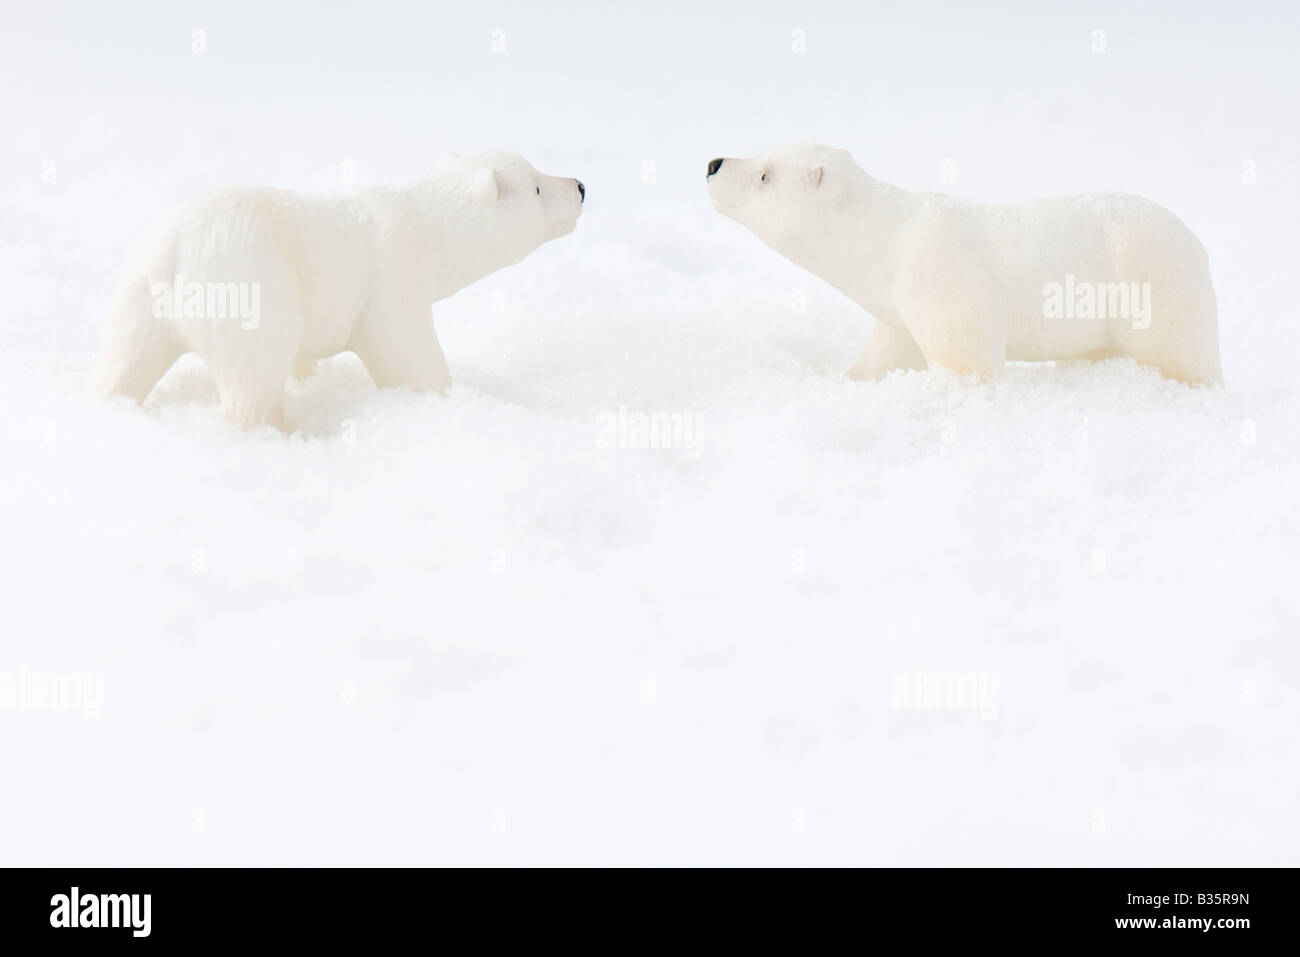 Toy polar bears in snow, face to face, side view Stock Photo